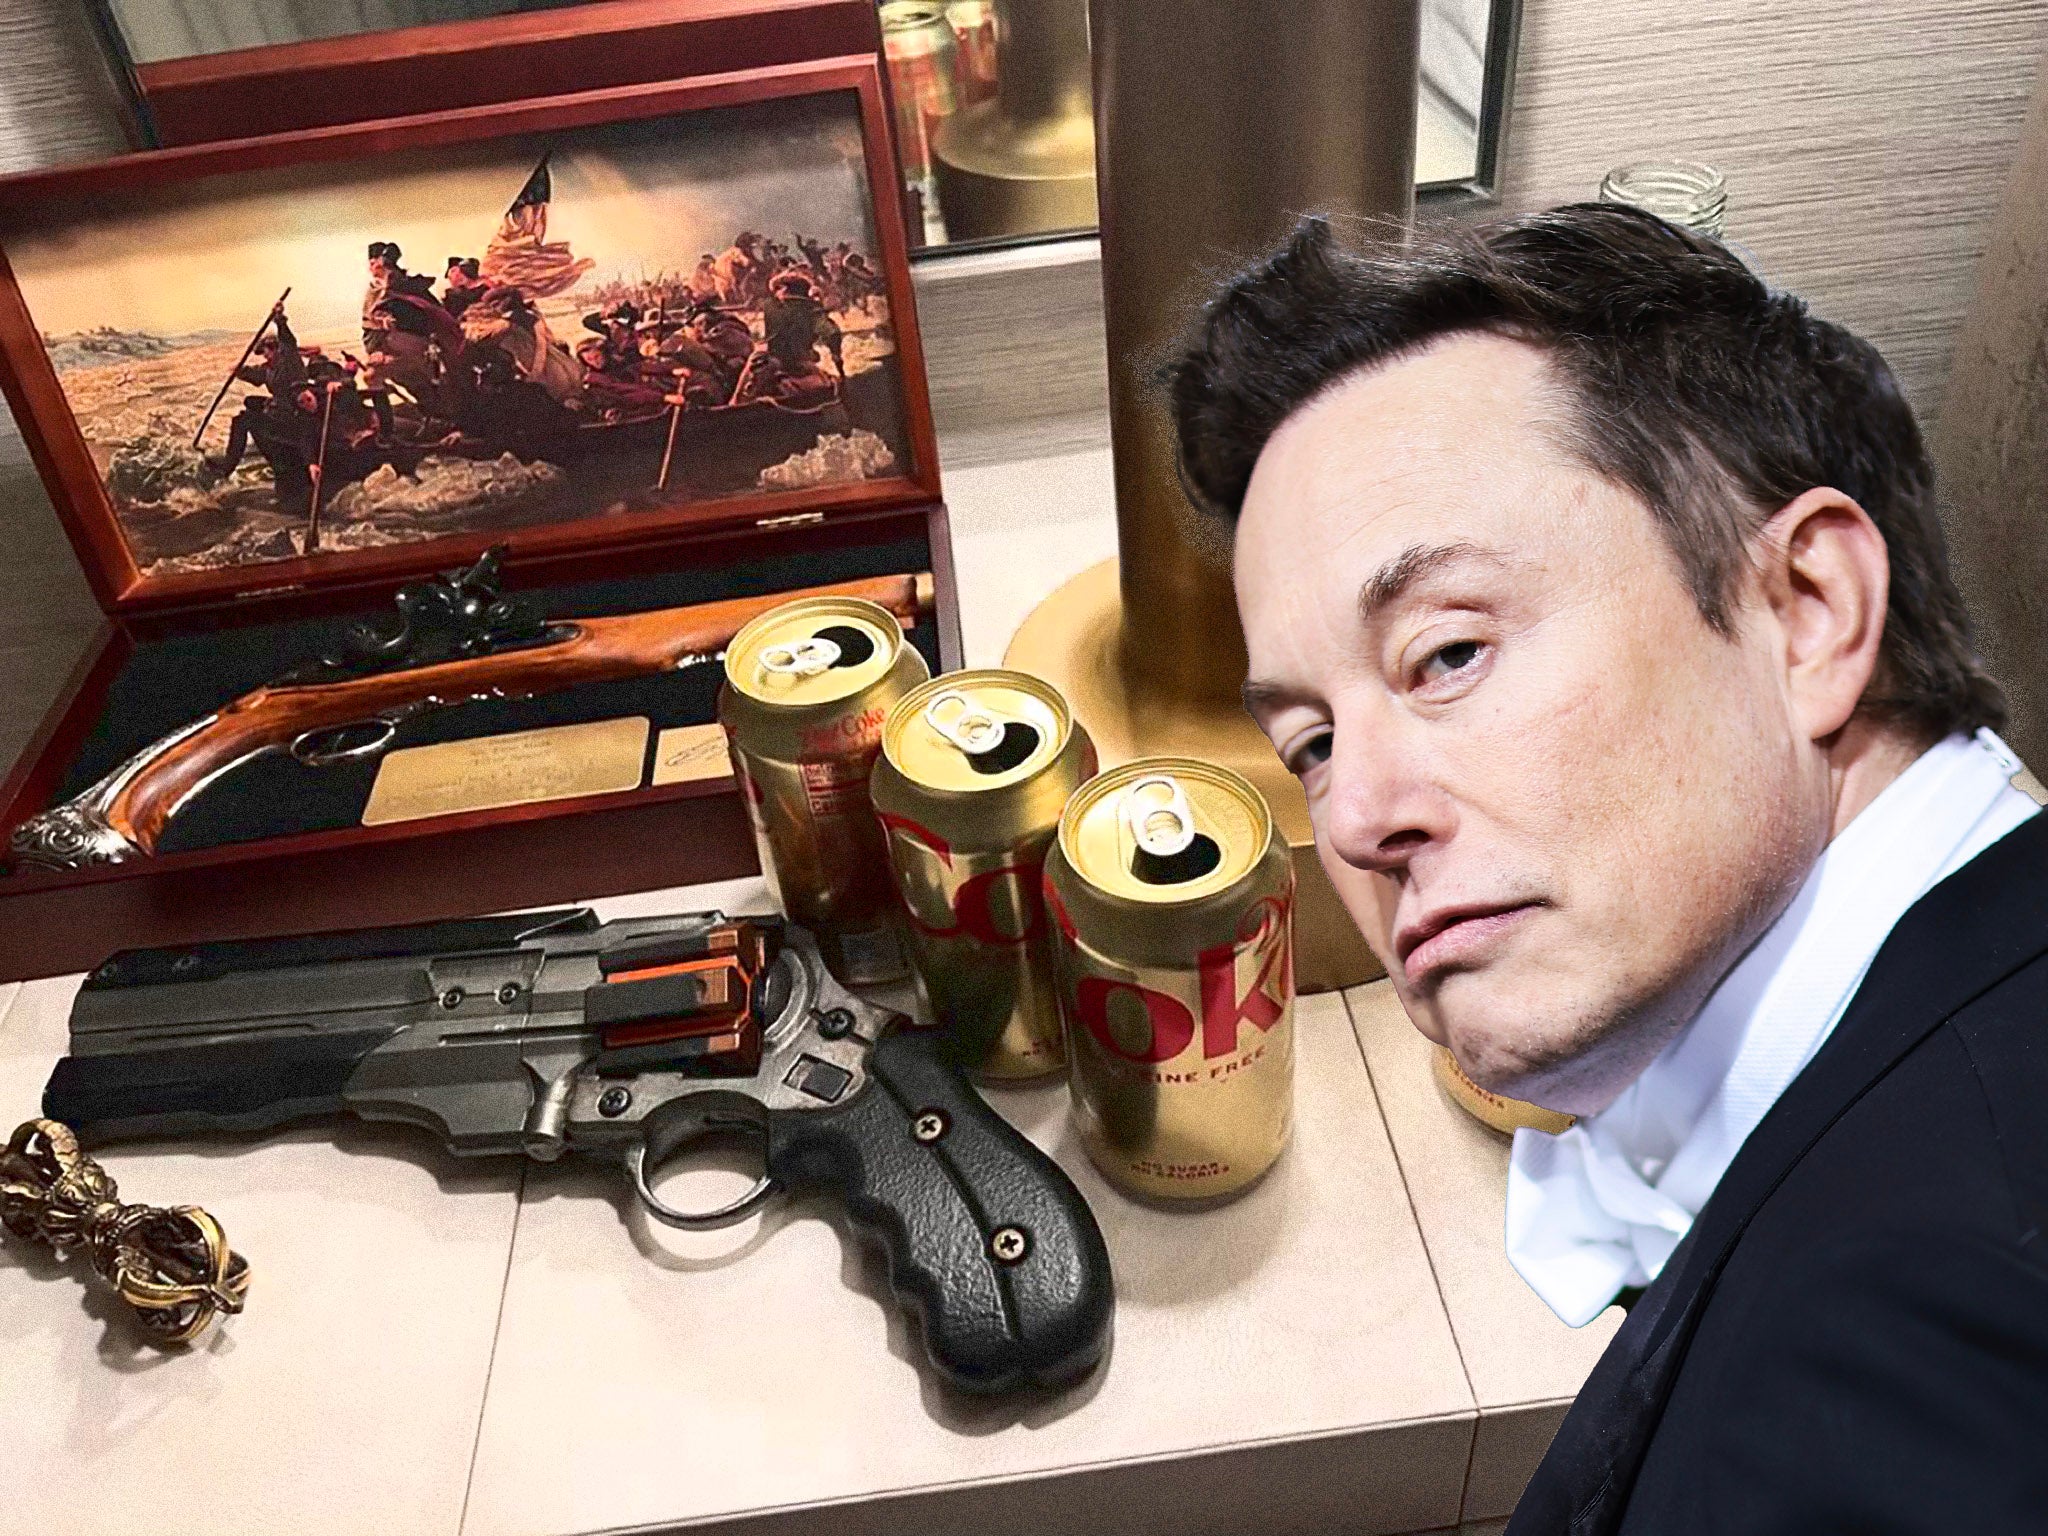 Elon Musk tweeted a photo of items on his bedside table, including gun replicas and empty Coca-Cola cans